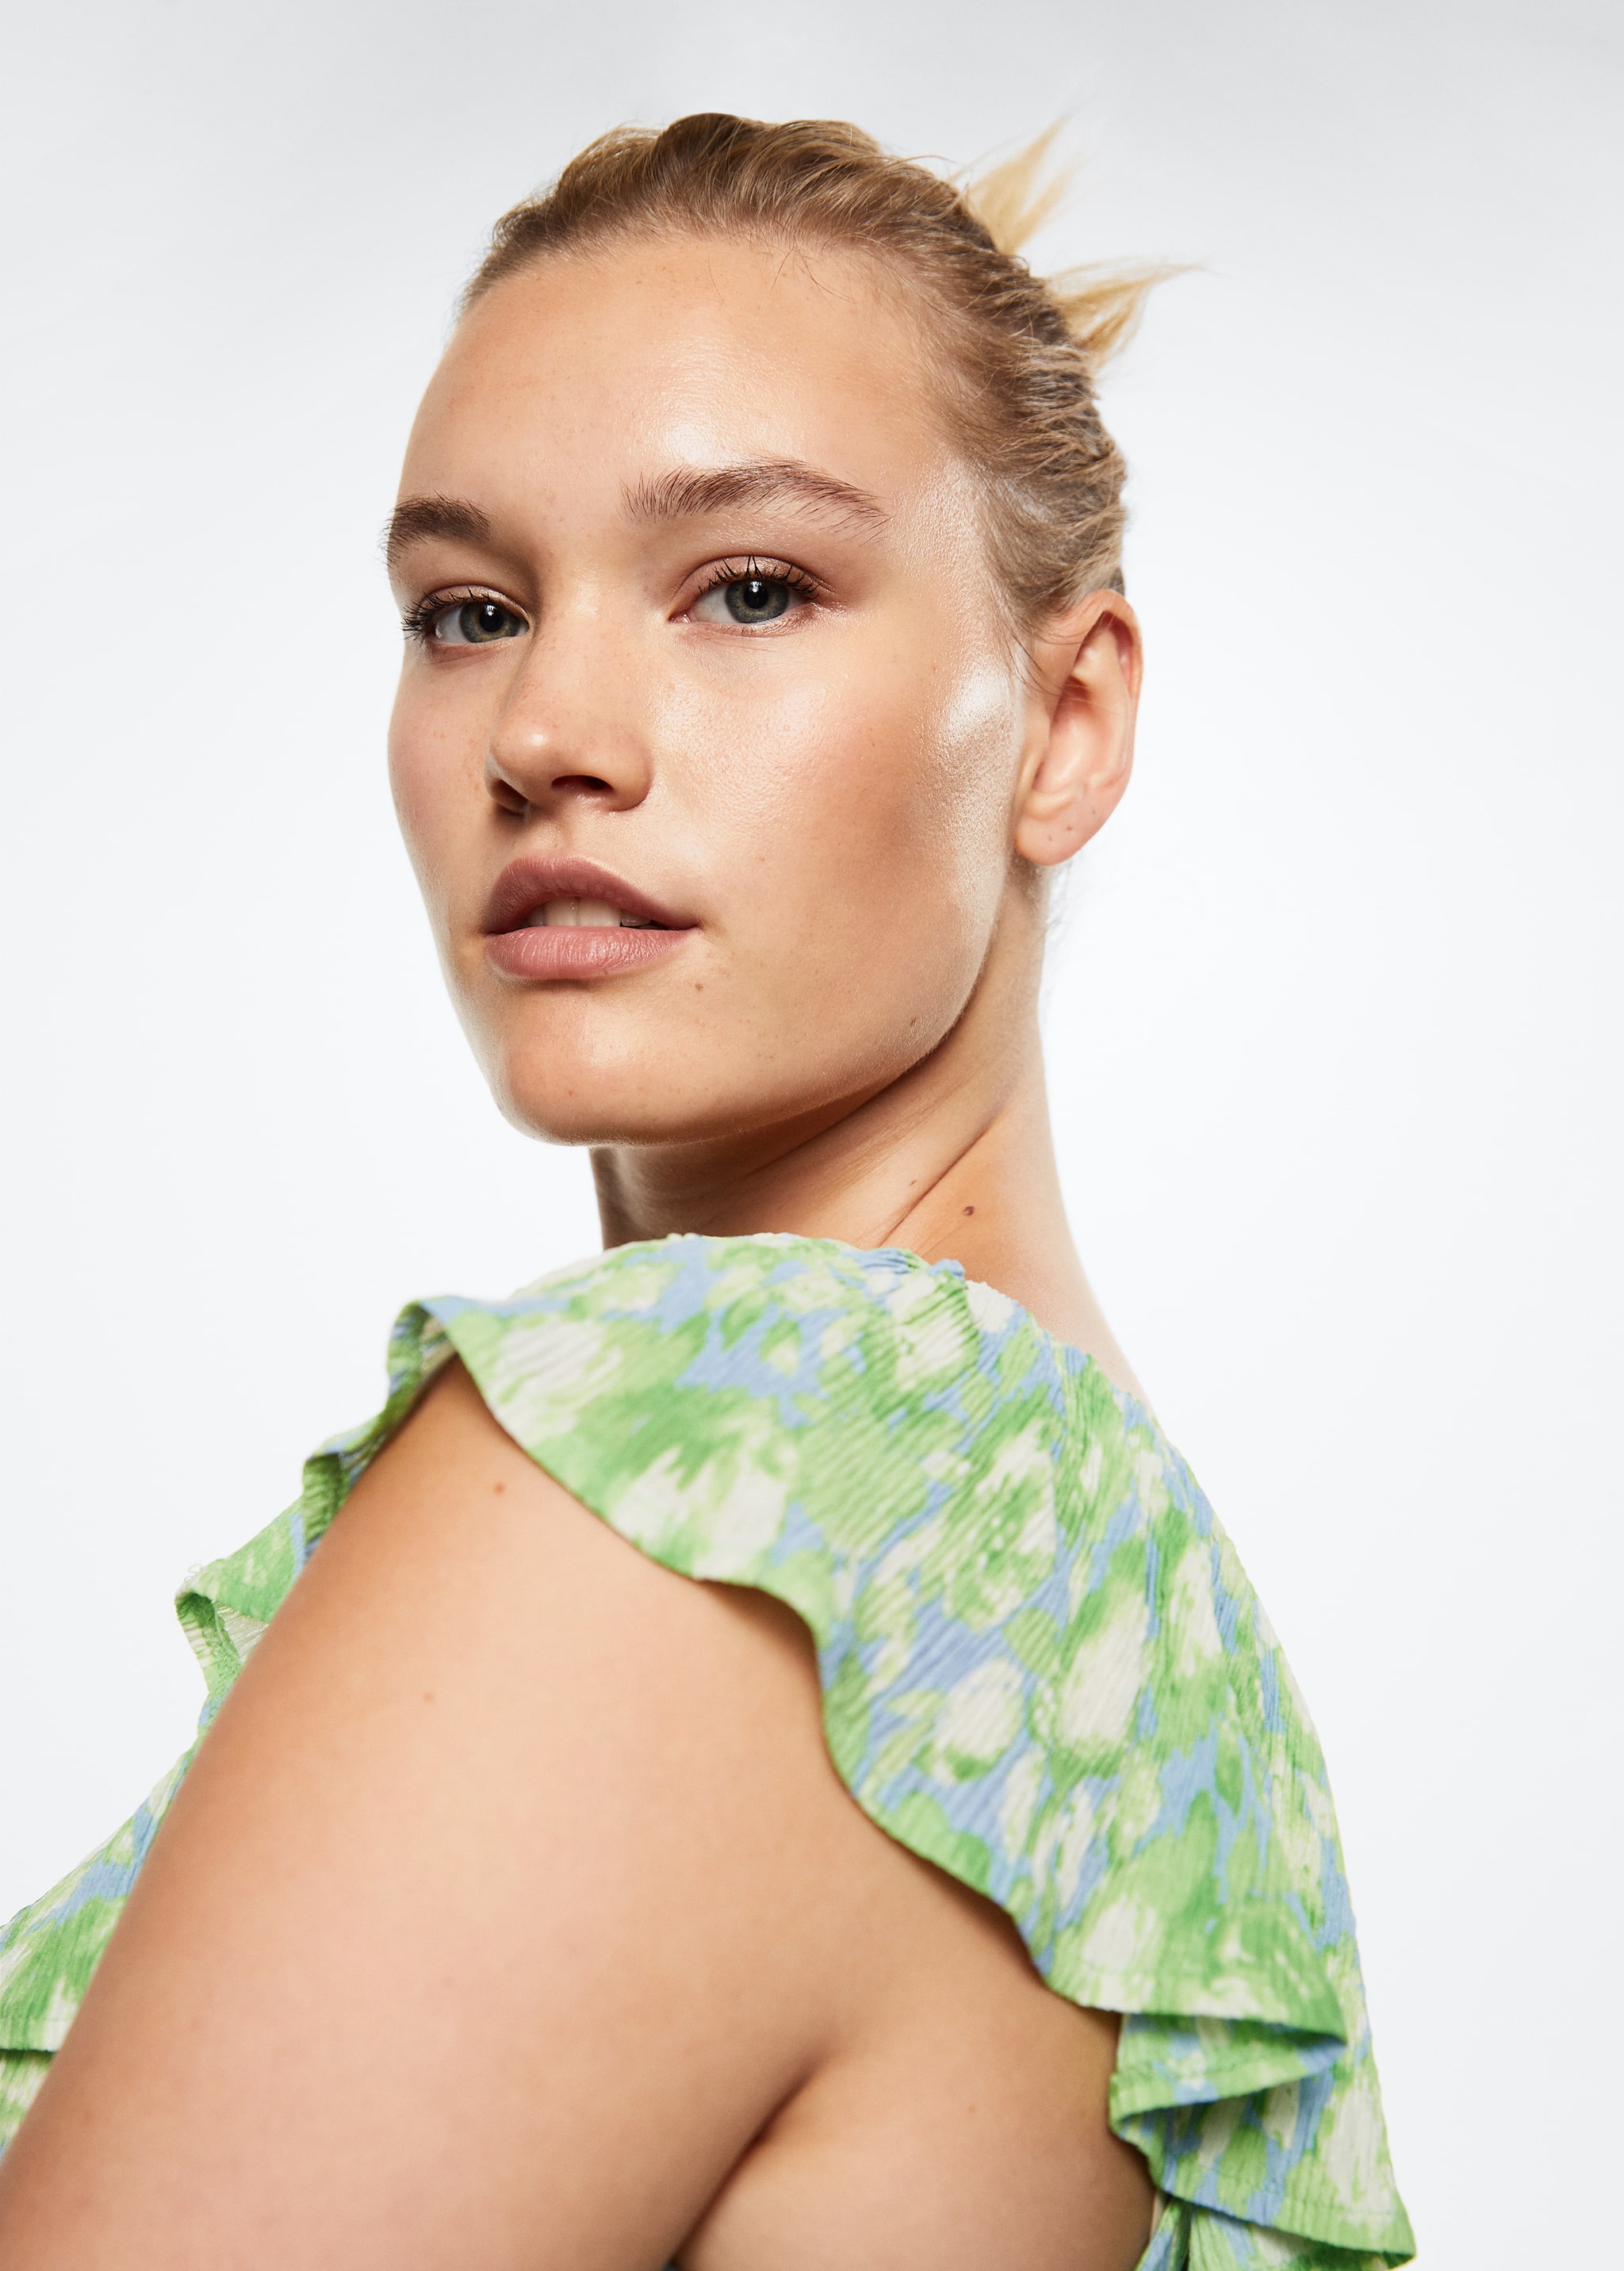 Floral print dress - Details of the article 4